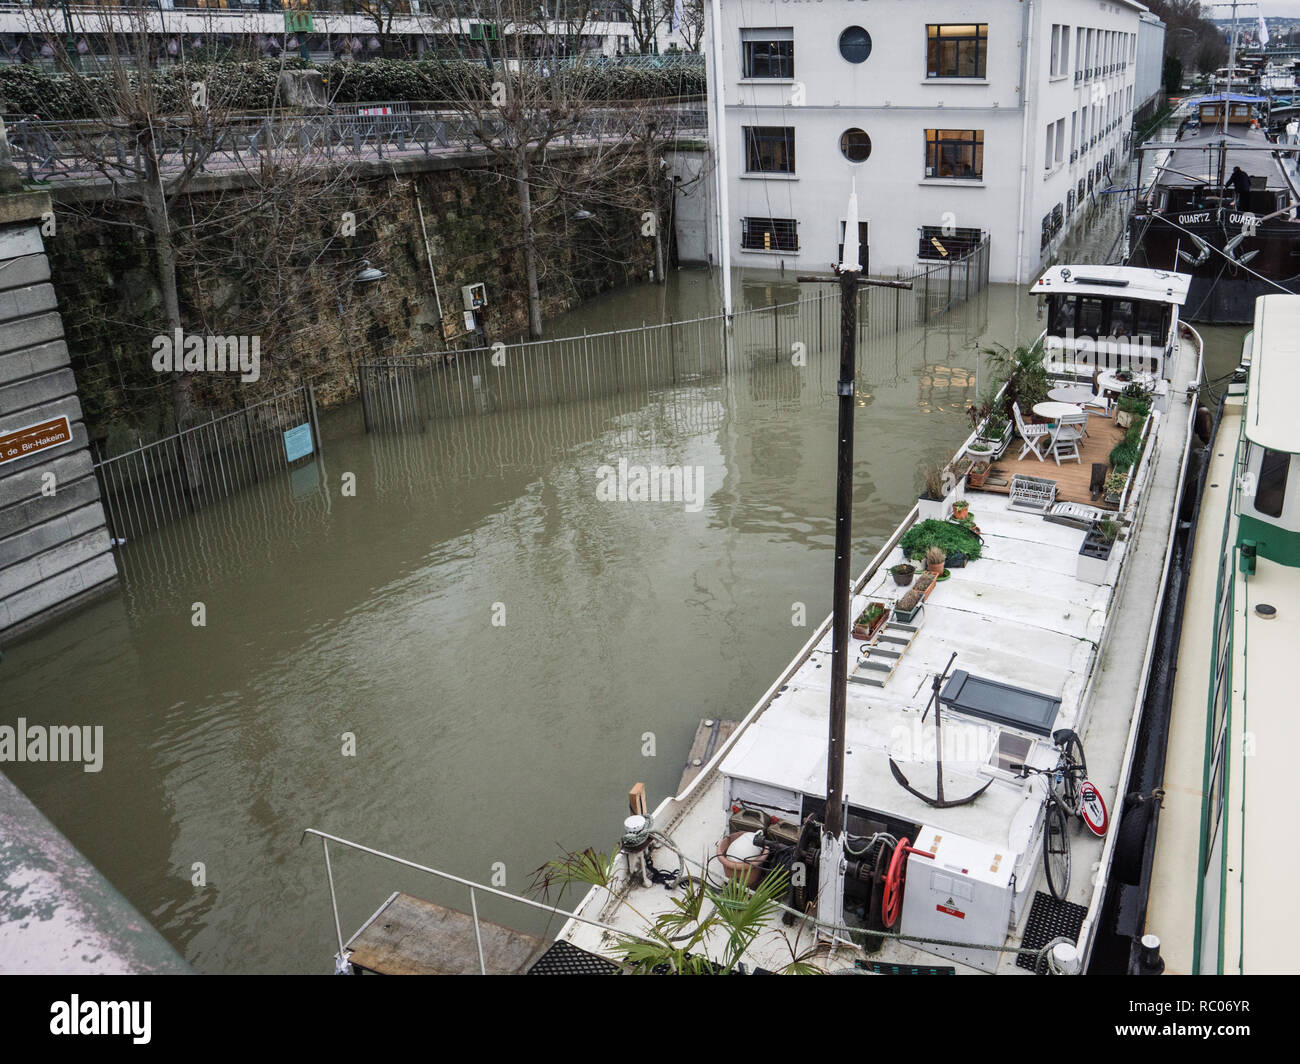 PARIS, FRANCE - JAN 30, 2018: Port Autonome de Paris building covered with water and nearby peniche barge after Swollen river Seine river's embankments overflow after days of heavy rain Stock Photo